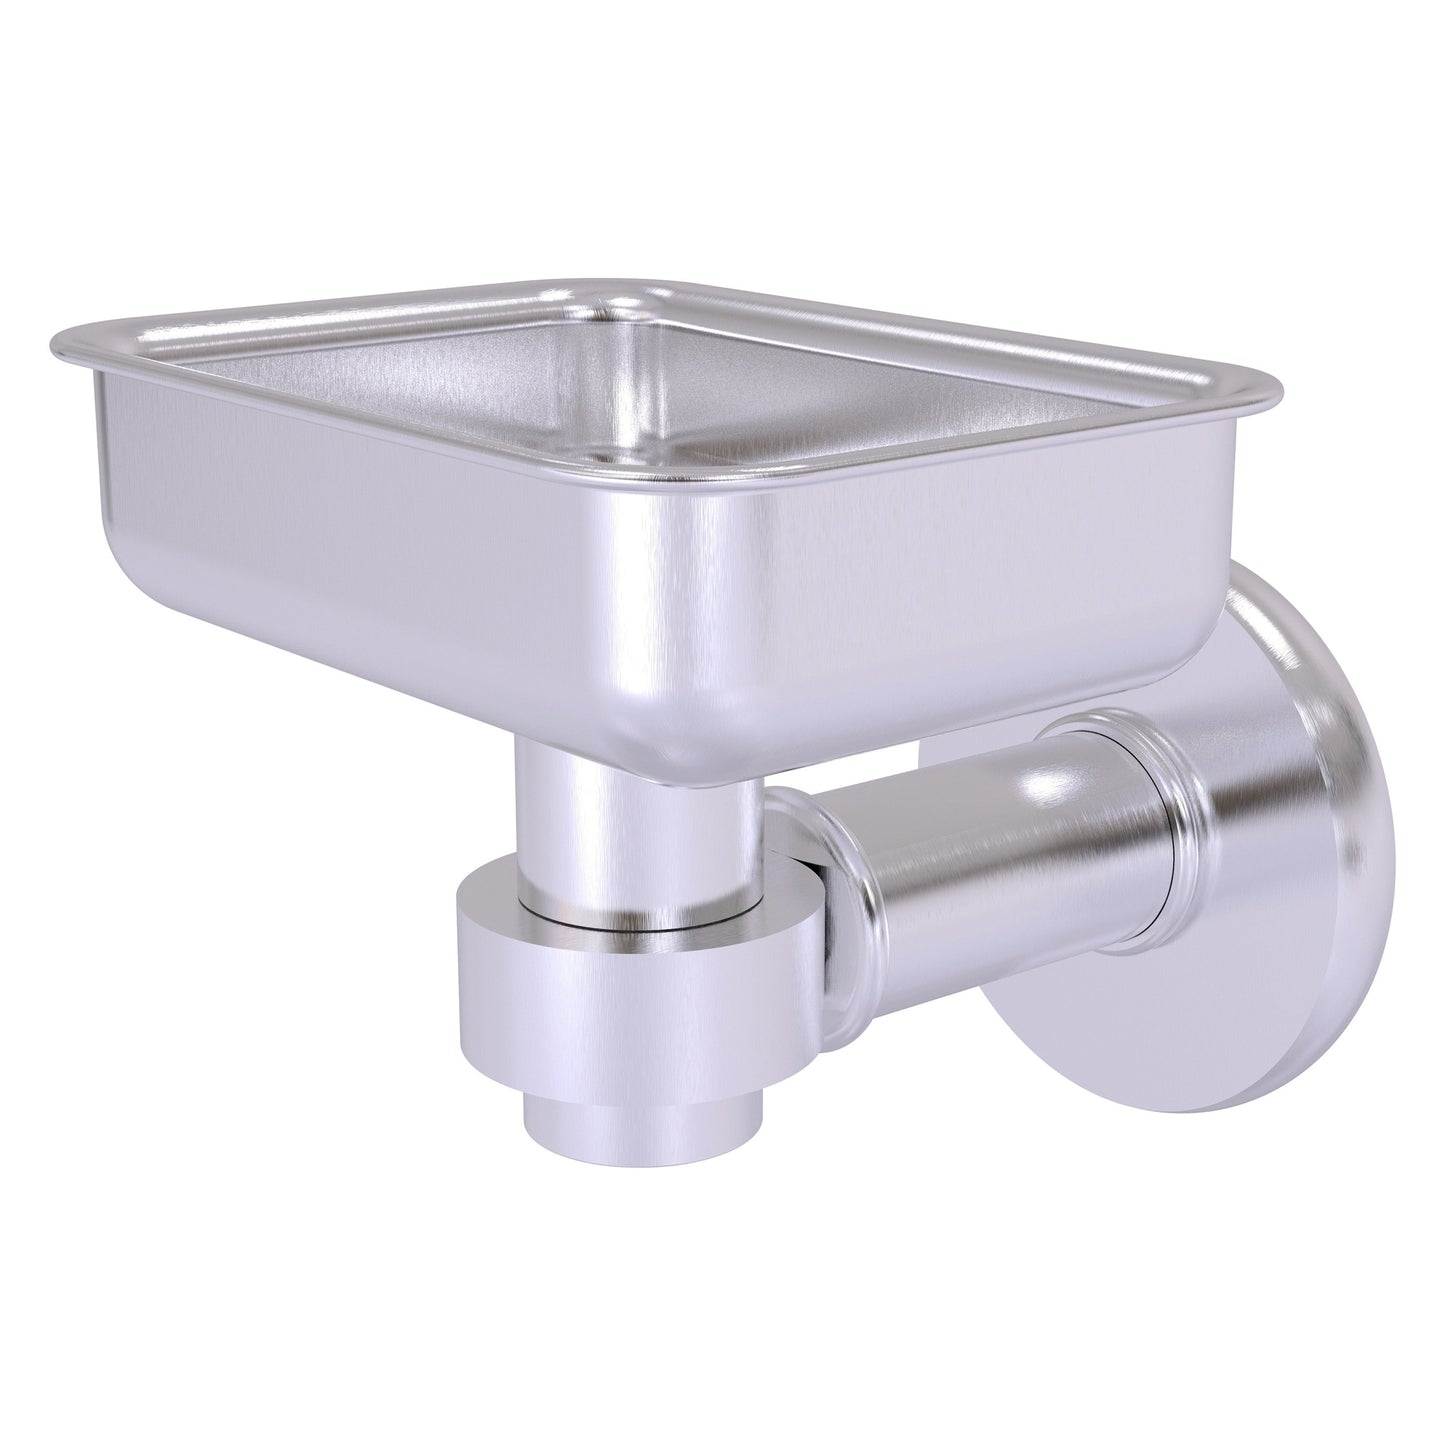 Allied Brass Continental 4.5" x 3.5" Satin Chrome Solid Brass Wall-Mounted Soap Dish Holder